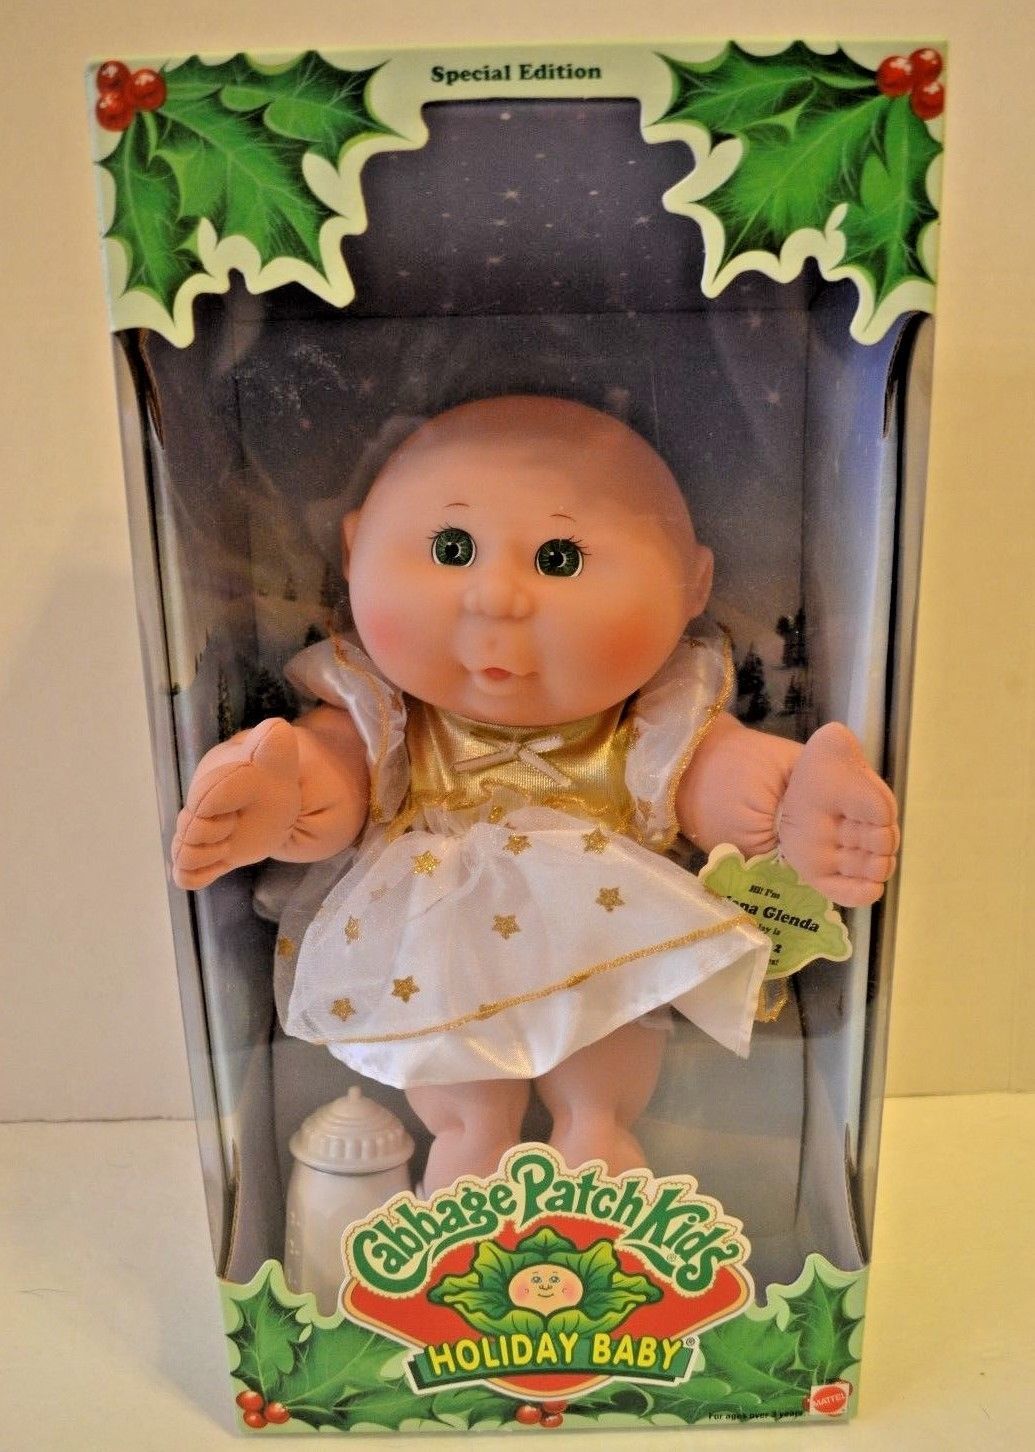 cabbage patch kids holiday baby